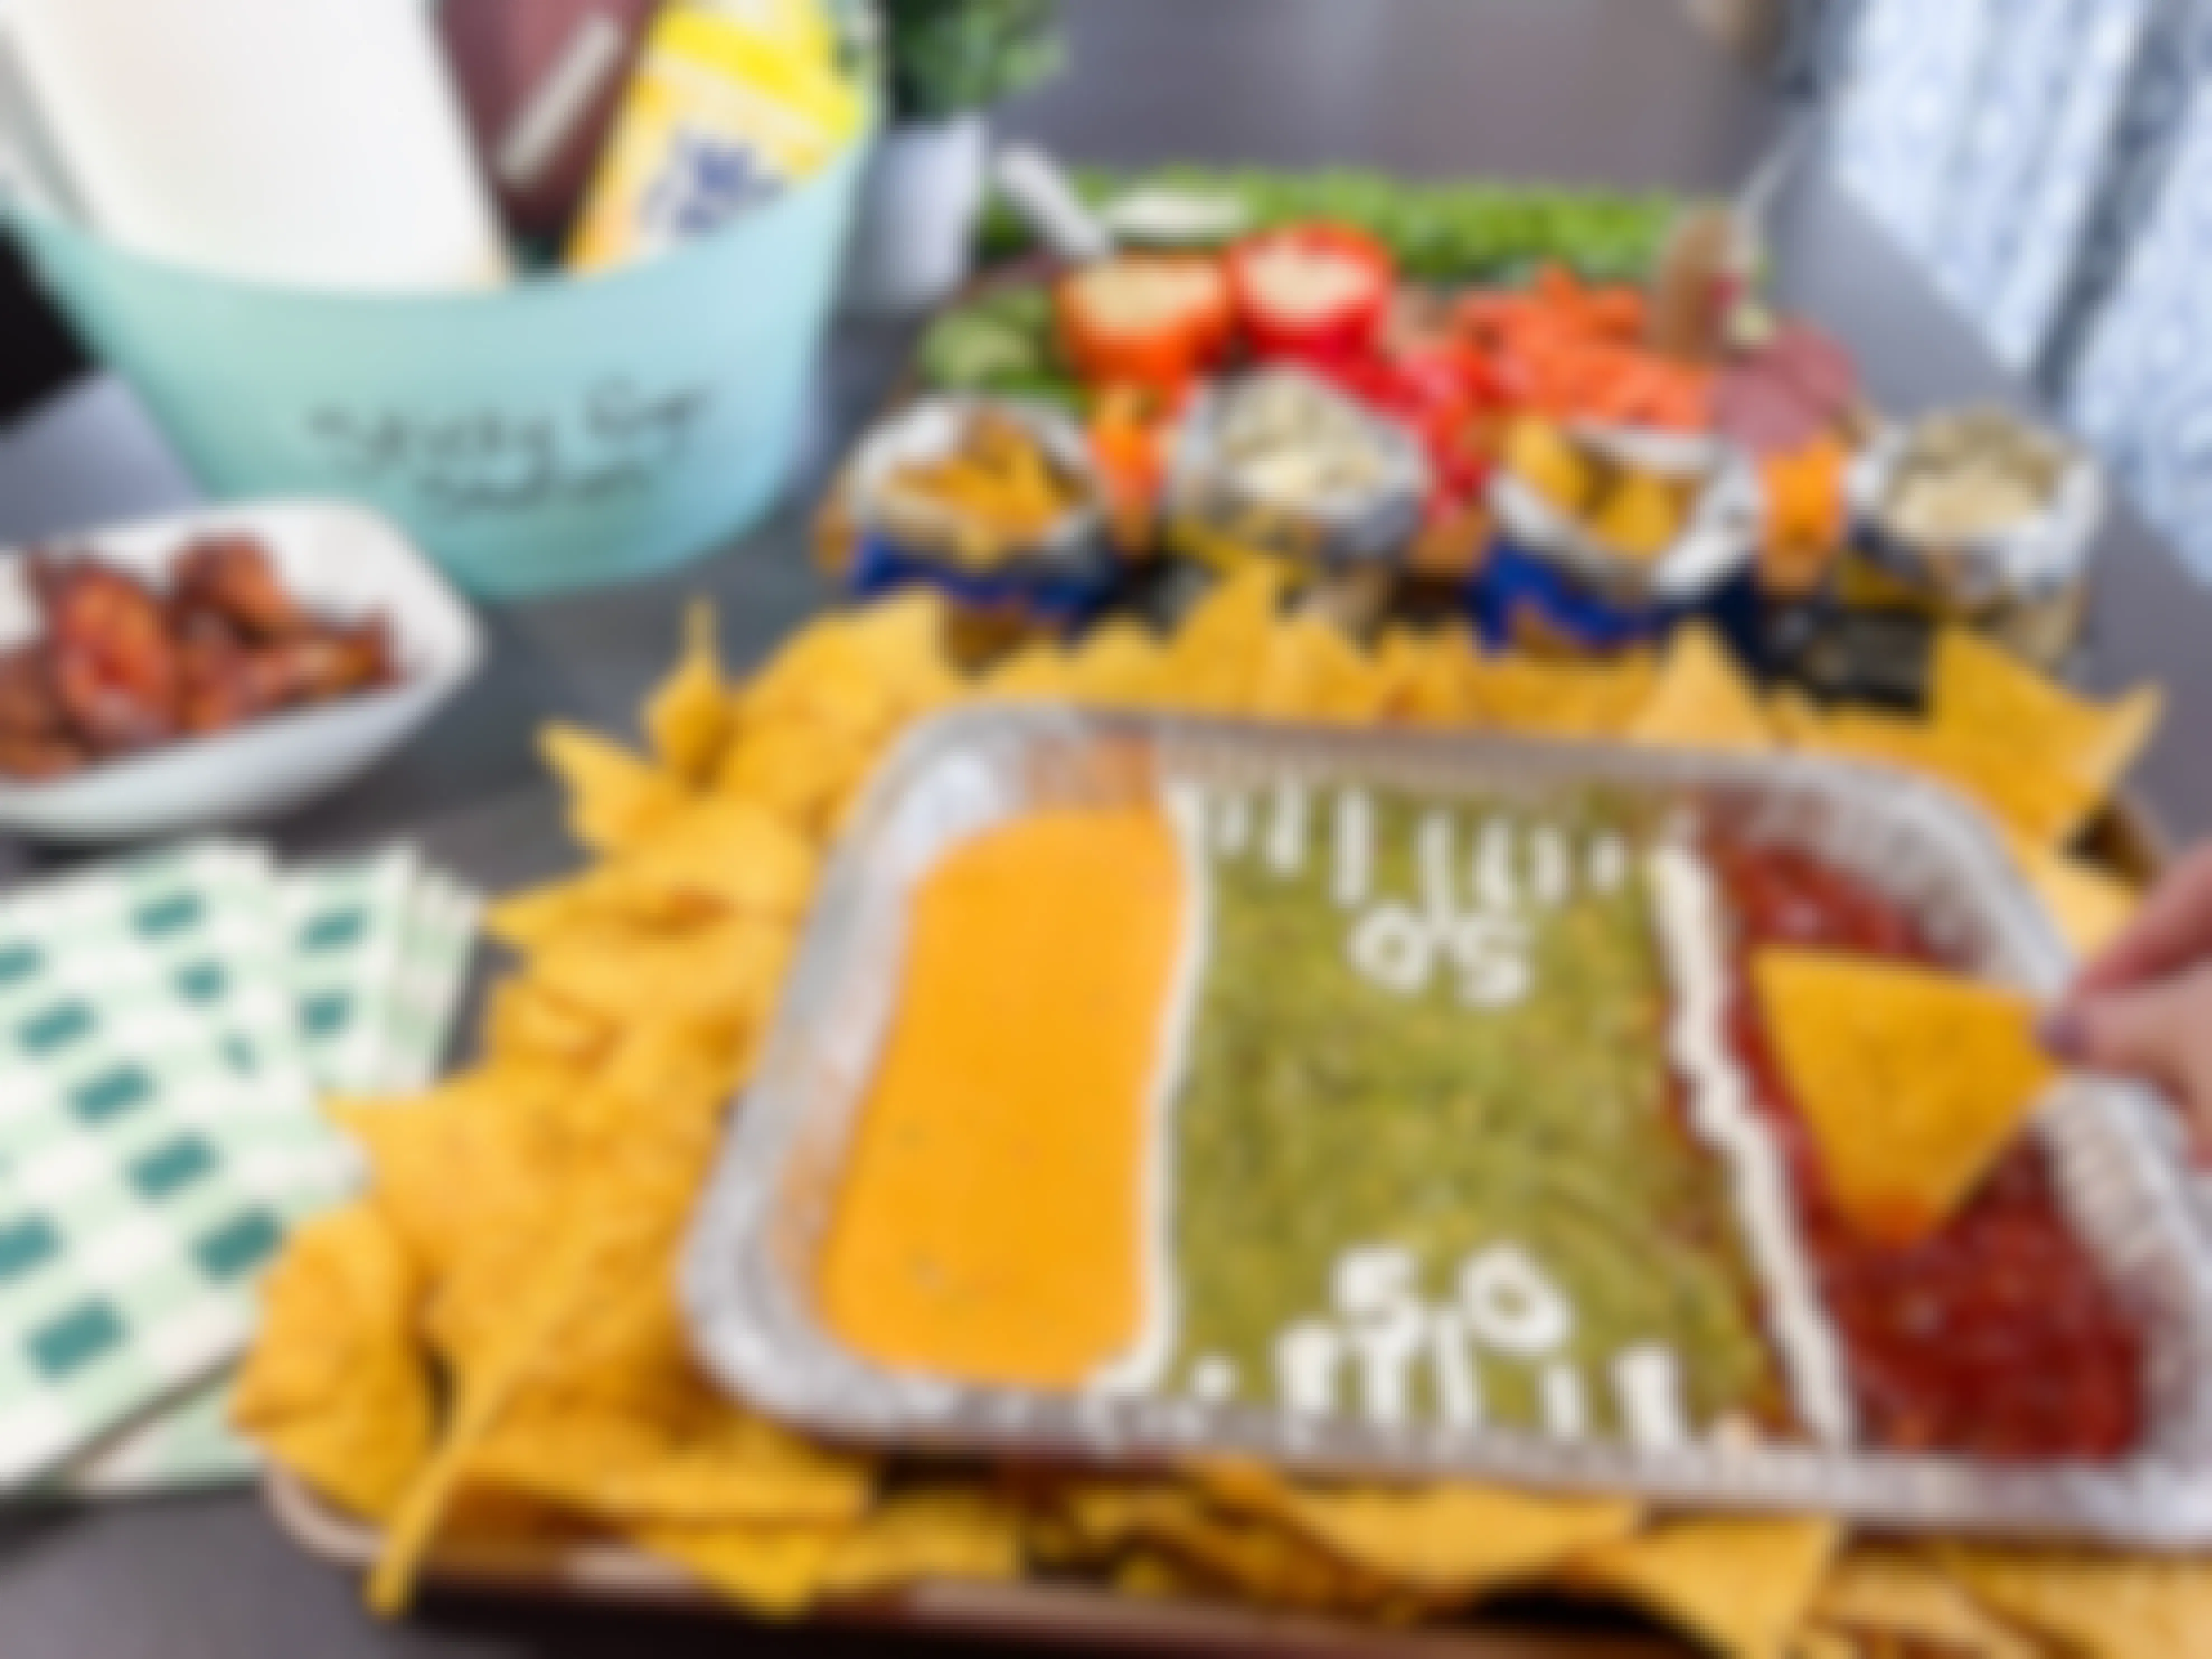 23 Super Bowl Party Hacks You'll Regret Not Knowing